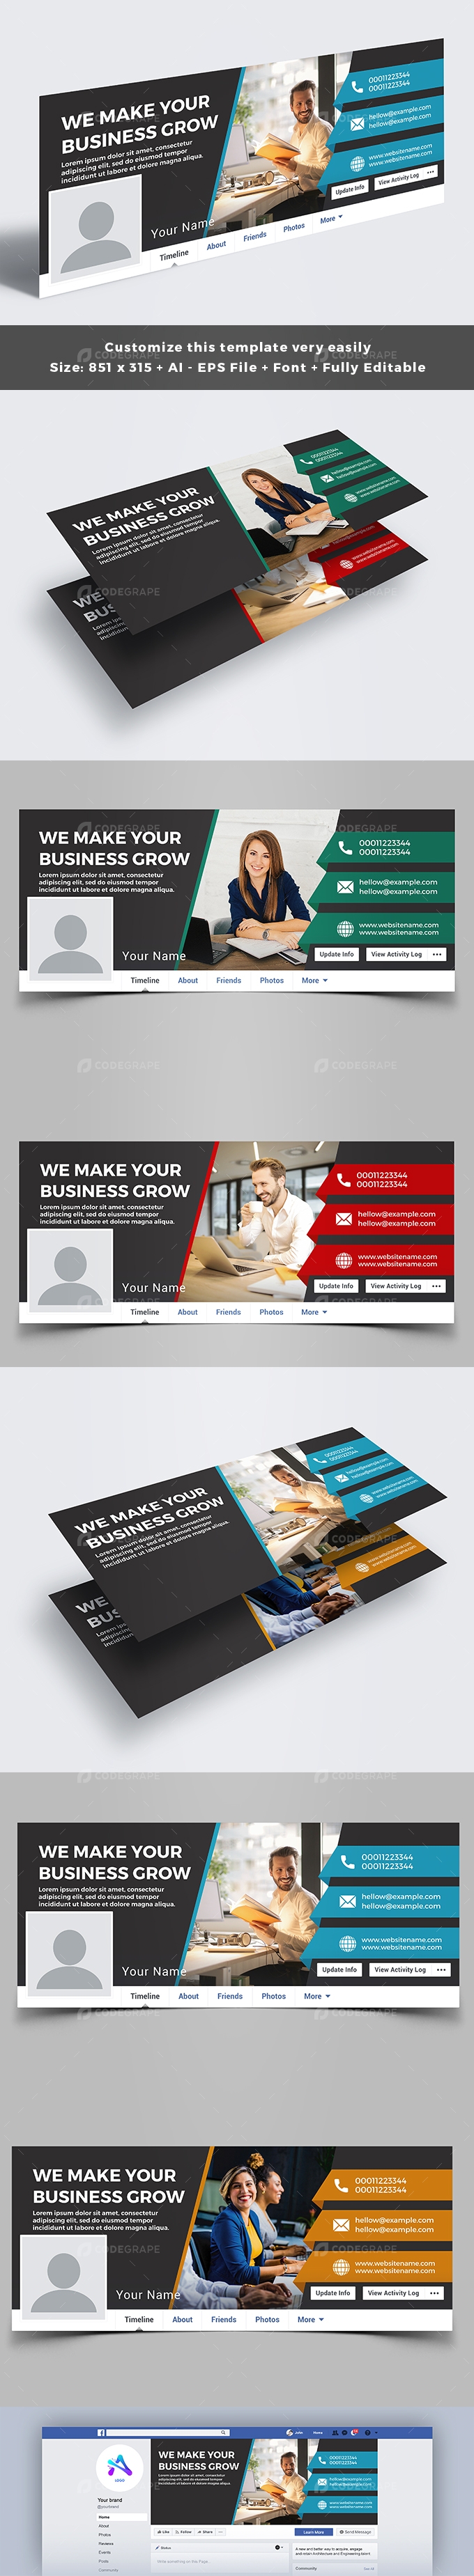 Corporate Facebook Business Cover Page Template